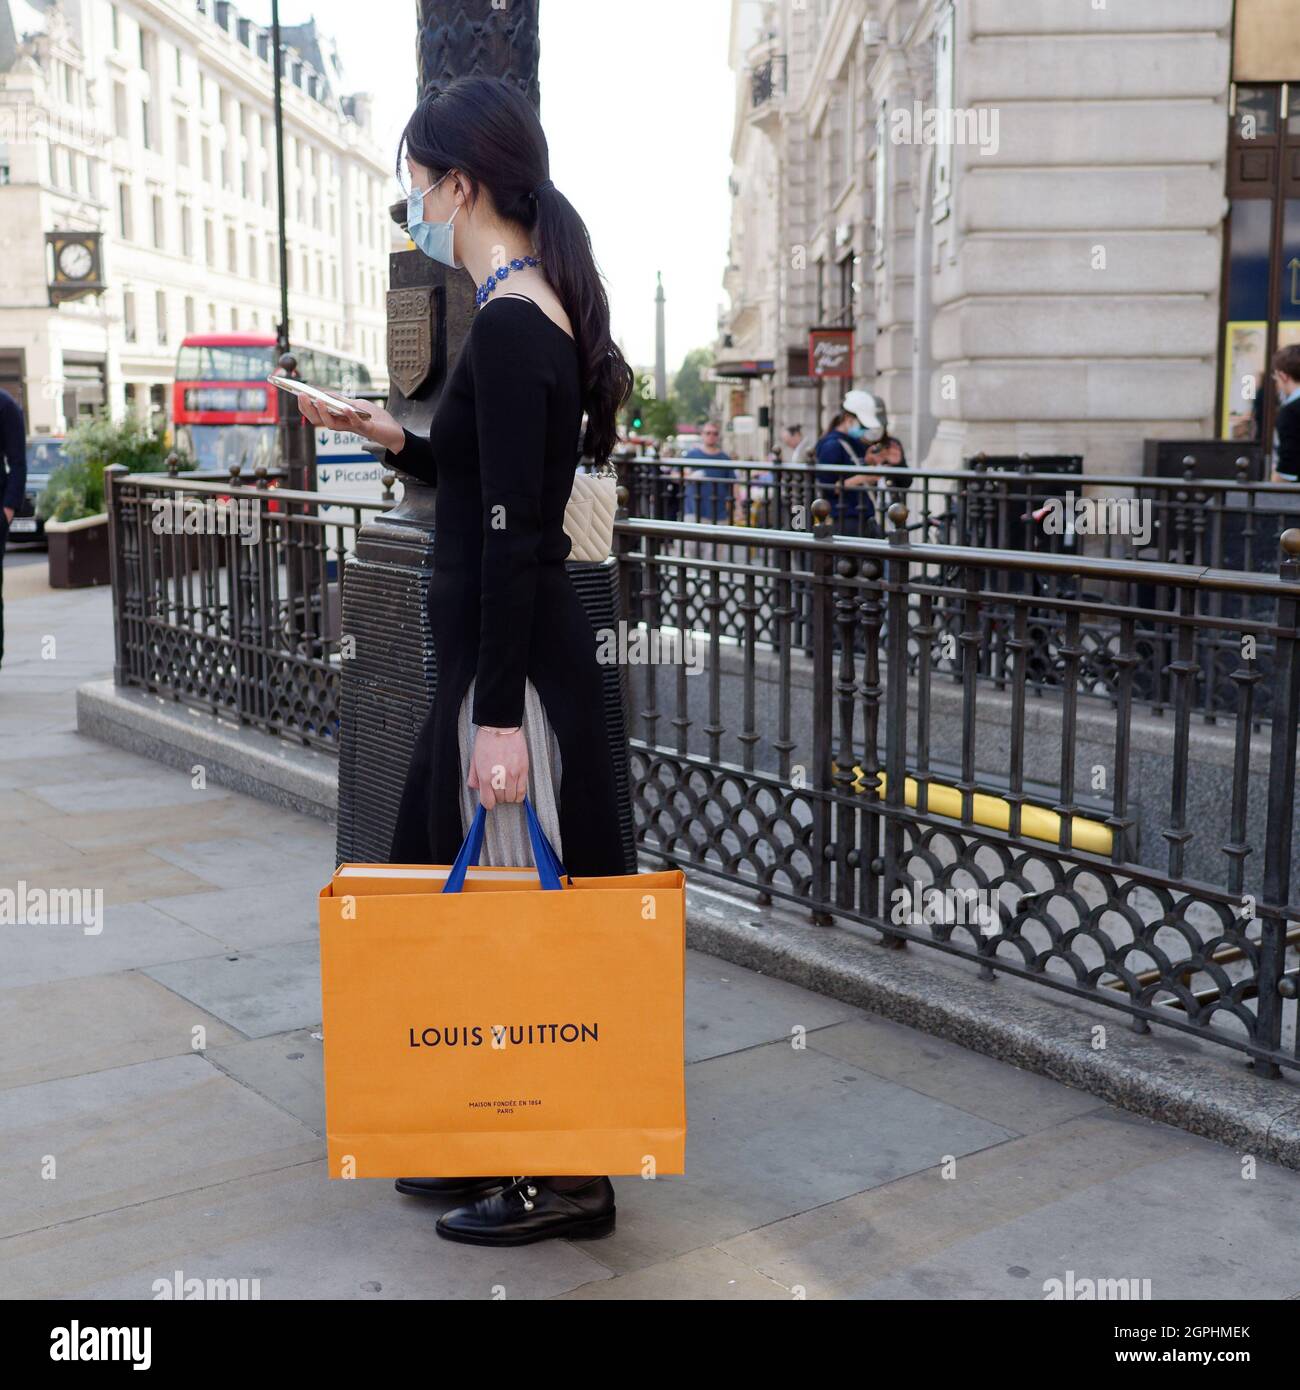 London, Greater London, England, September 21 2021: Elegant asian lady in a  black outfit checks her phone whilst carrying a Louis Vuitton shopping bag  Stock Photo - Alamy